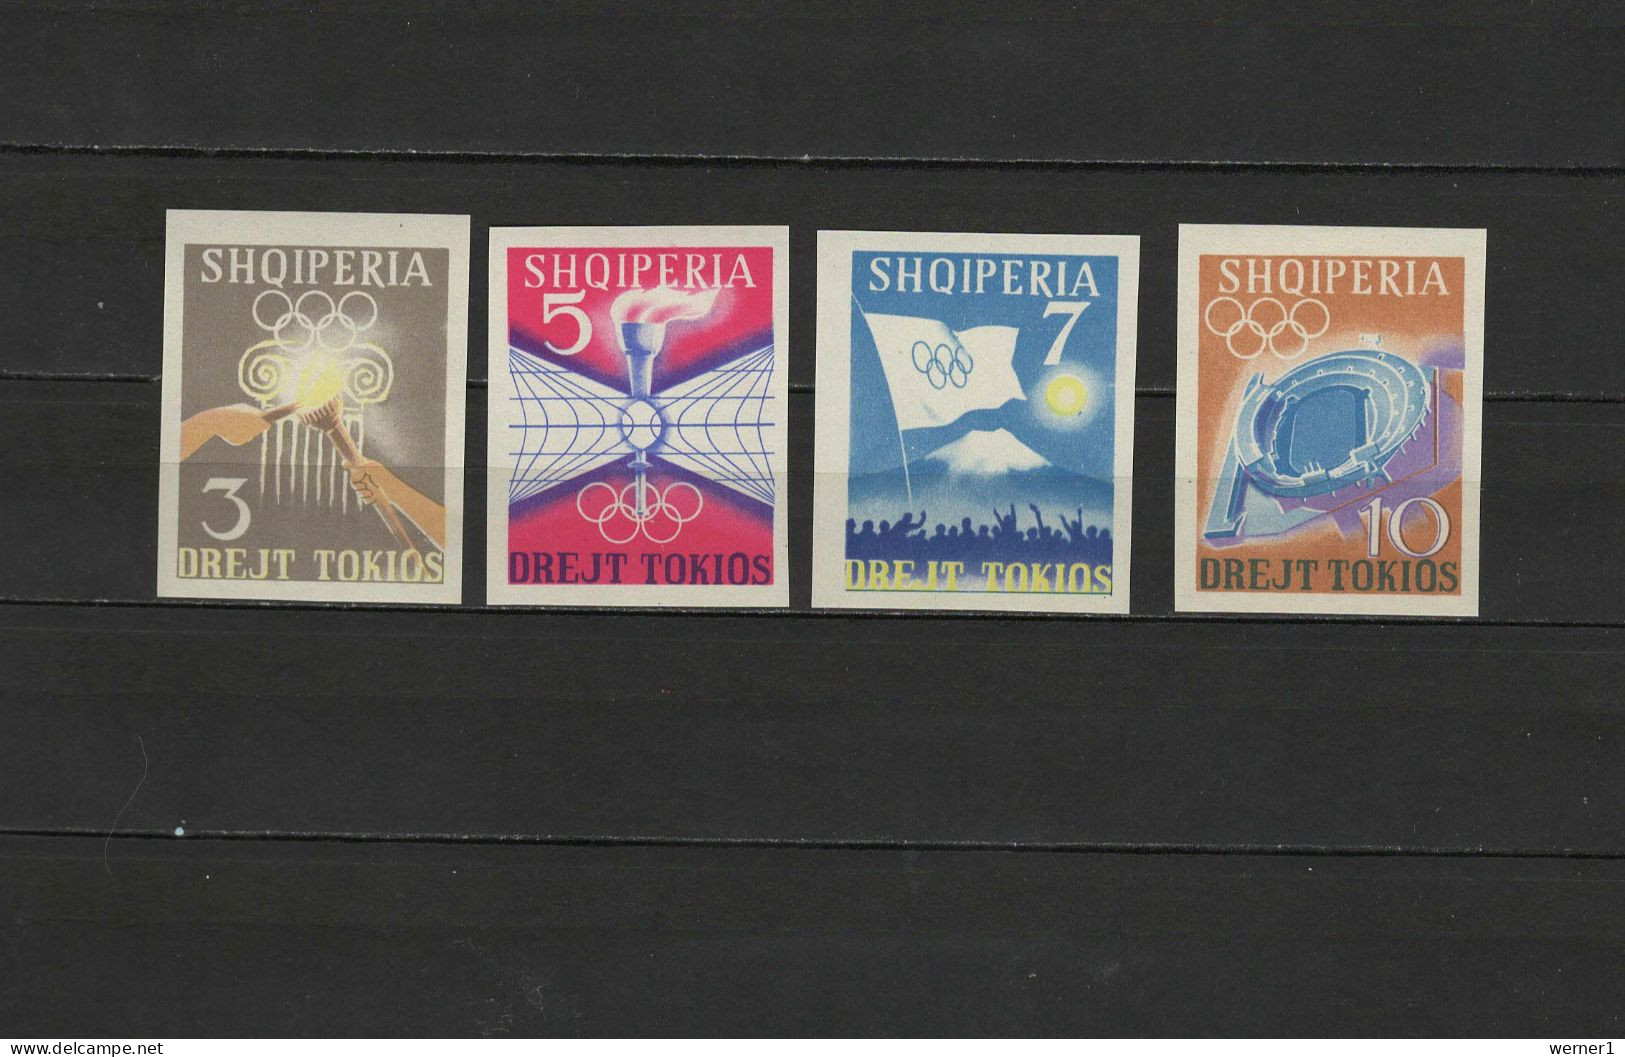 Albania 1964 Olympic Games Tokyo Set Of 4 Imperf. MNH - Ete 1964: Tokyo